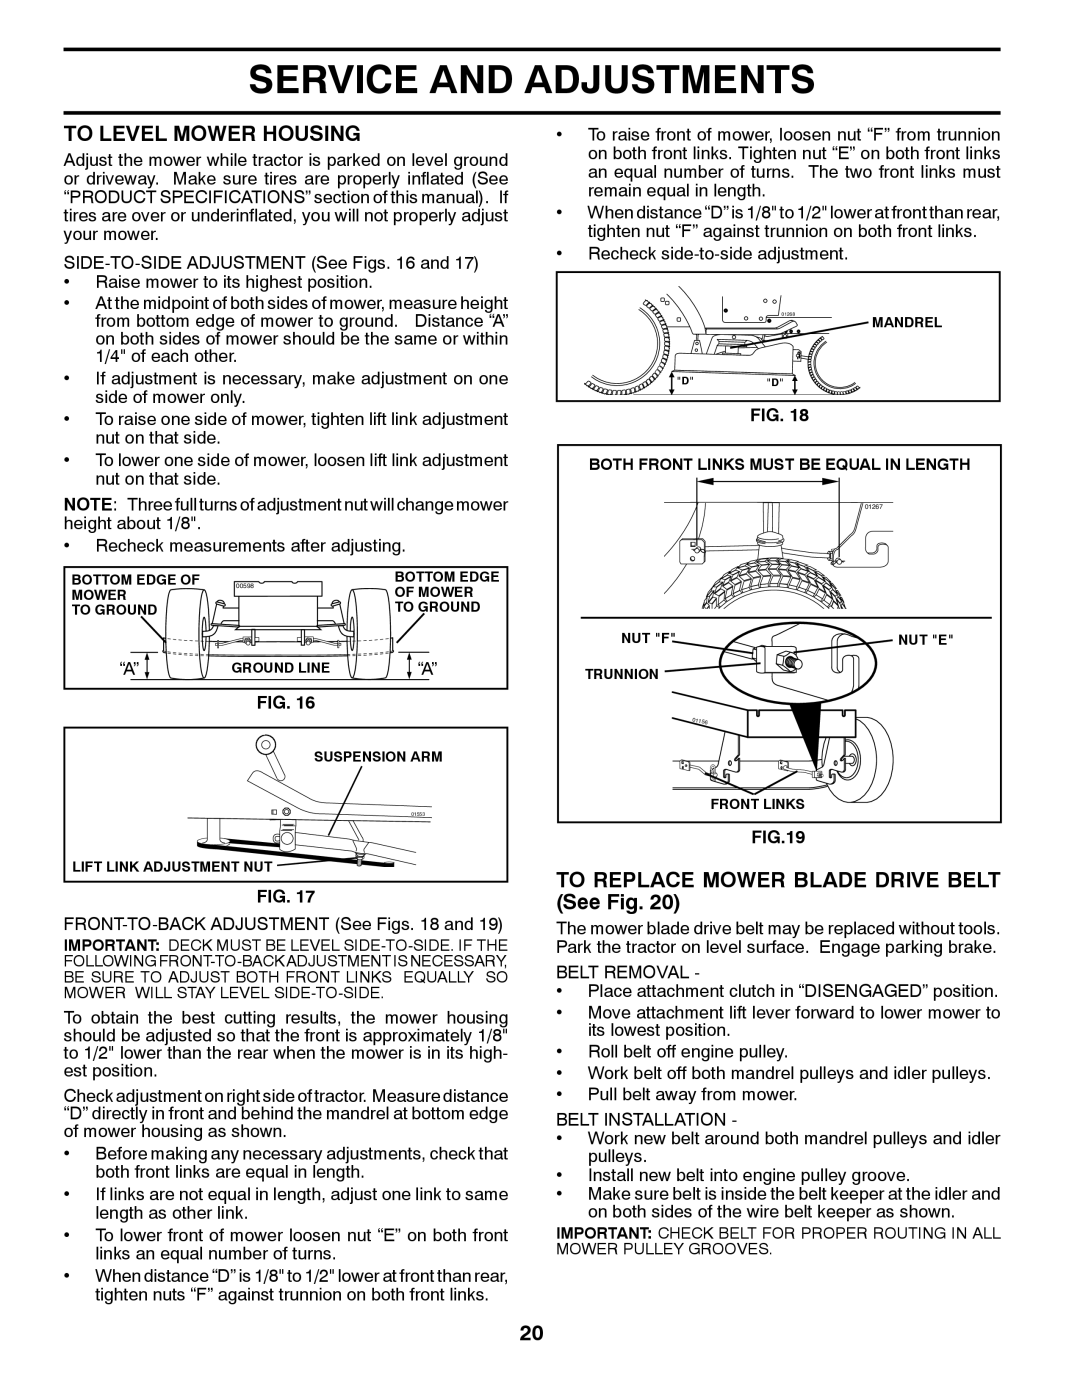 Husqvarna LTH1797 owner manual To Level Mower Housing, TO REPLACE MOWER BLADE DRIVE BELT See Fig, Service And Adjustments 